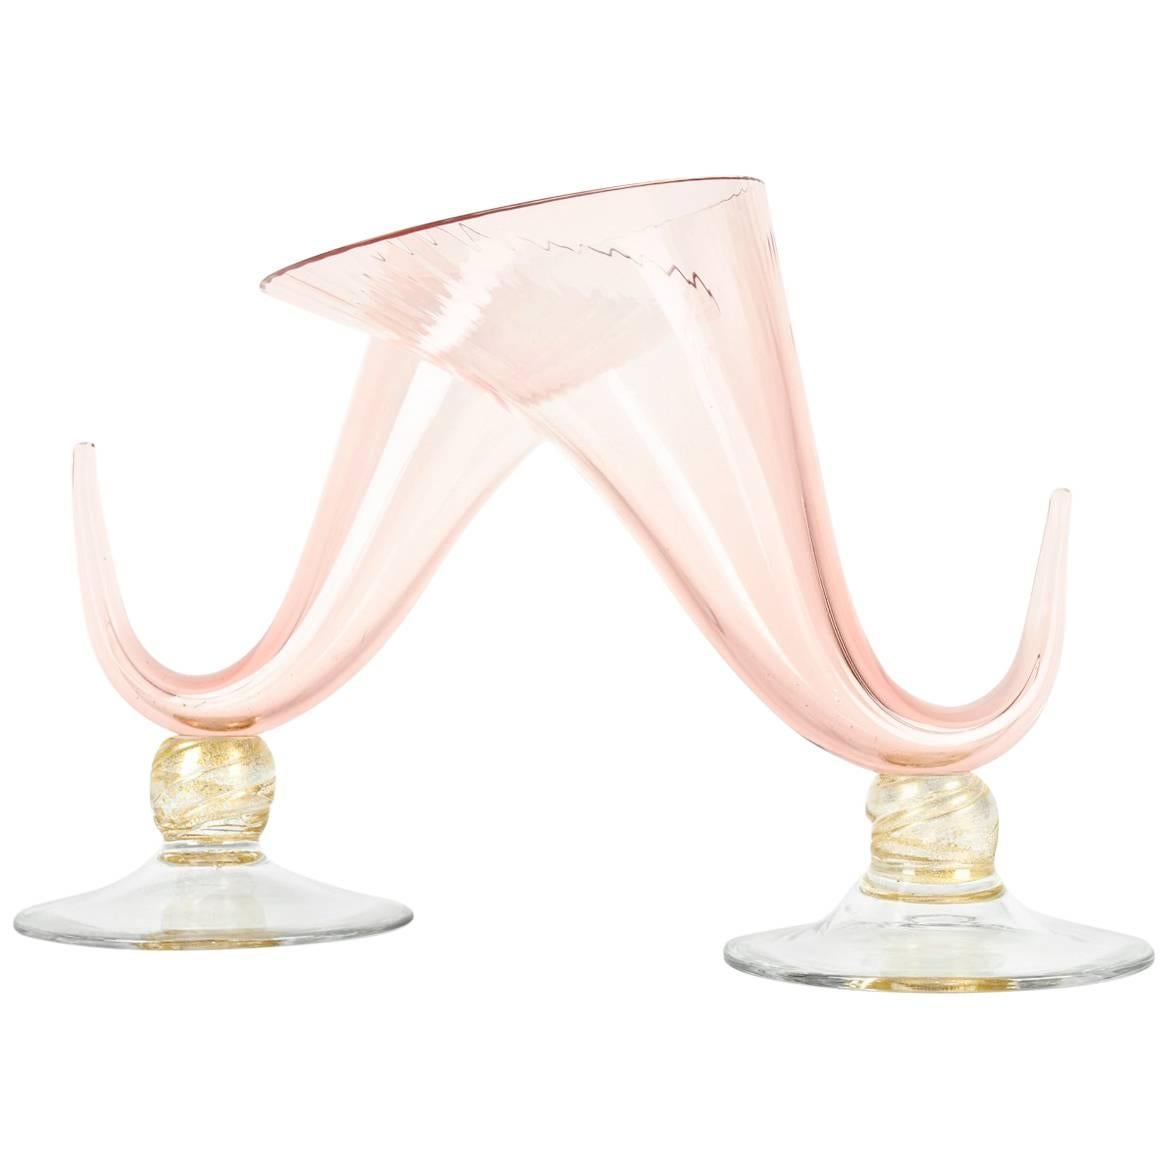 Pair of Murano Glass Decorative Horn Vases or Pieces